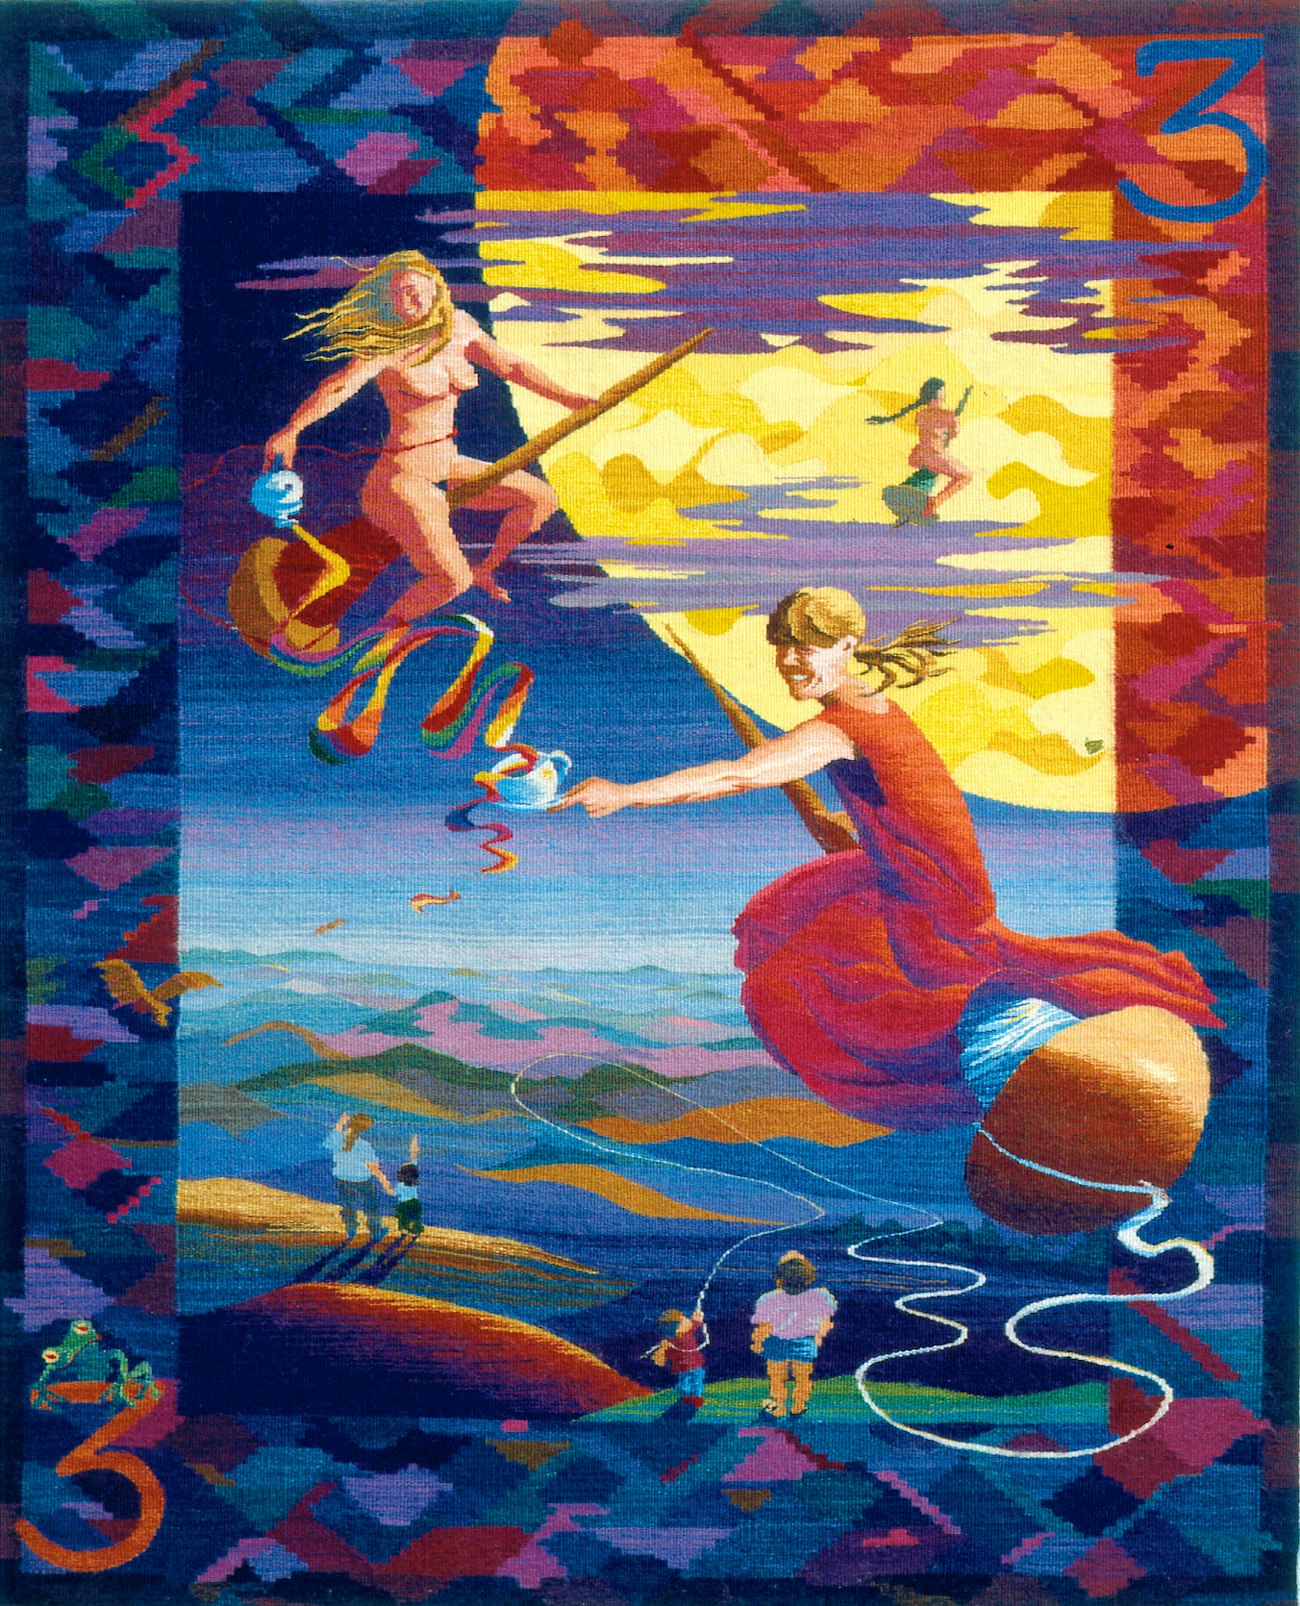 Tapestry, mainly red and blue, with three women riding spindles like broomsticks